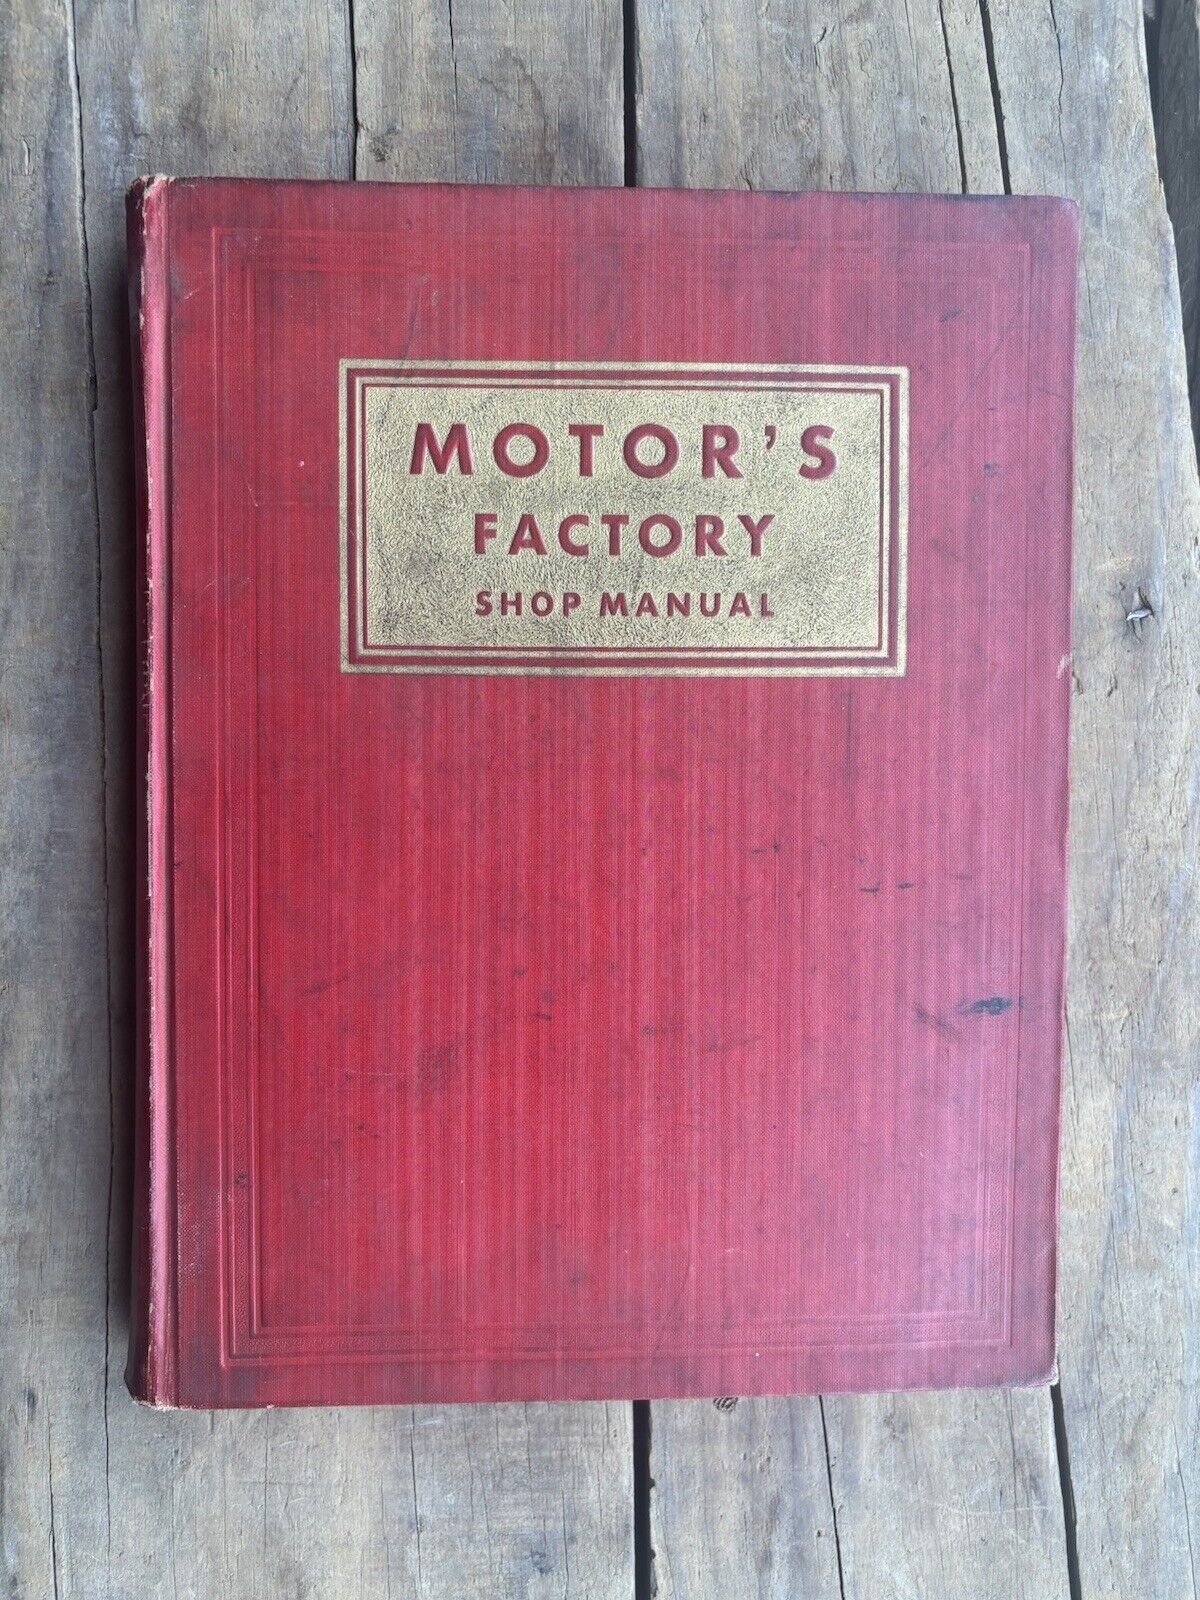 Vintage 1939 Motor\'s Factory Shop Manual Red With Gold Label